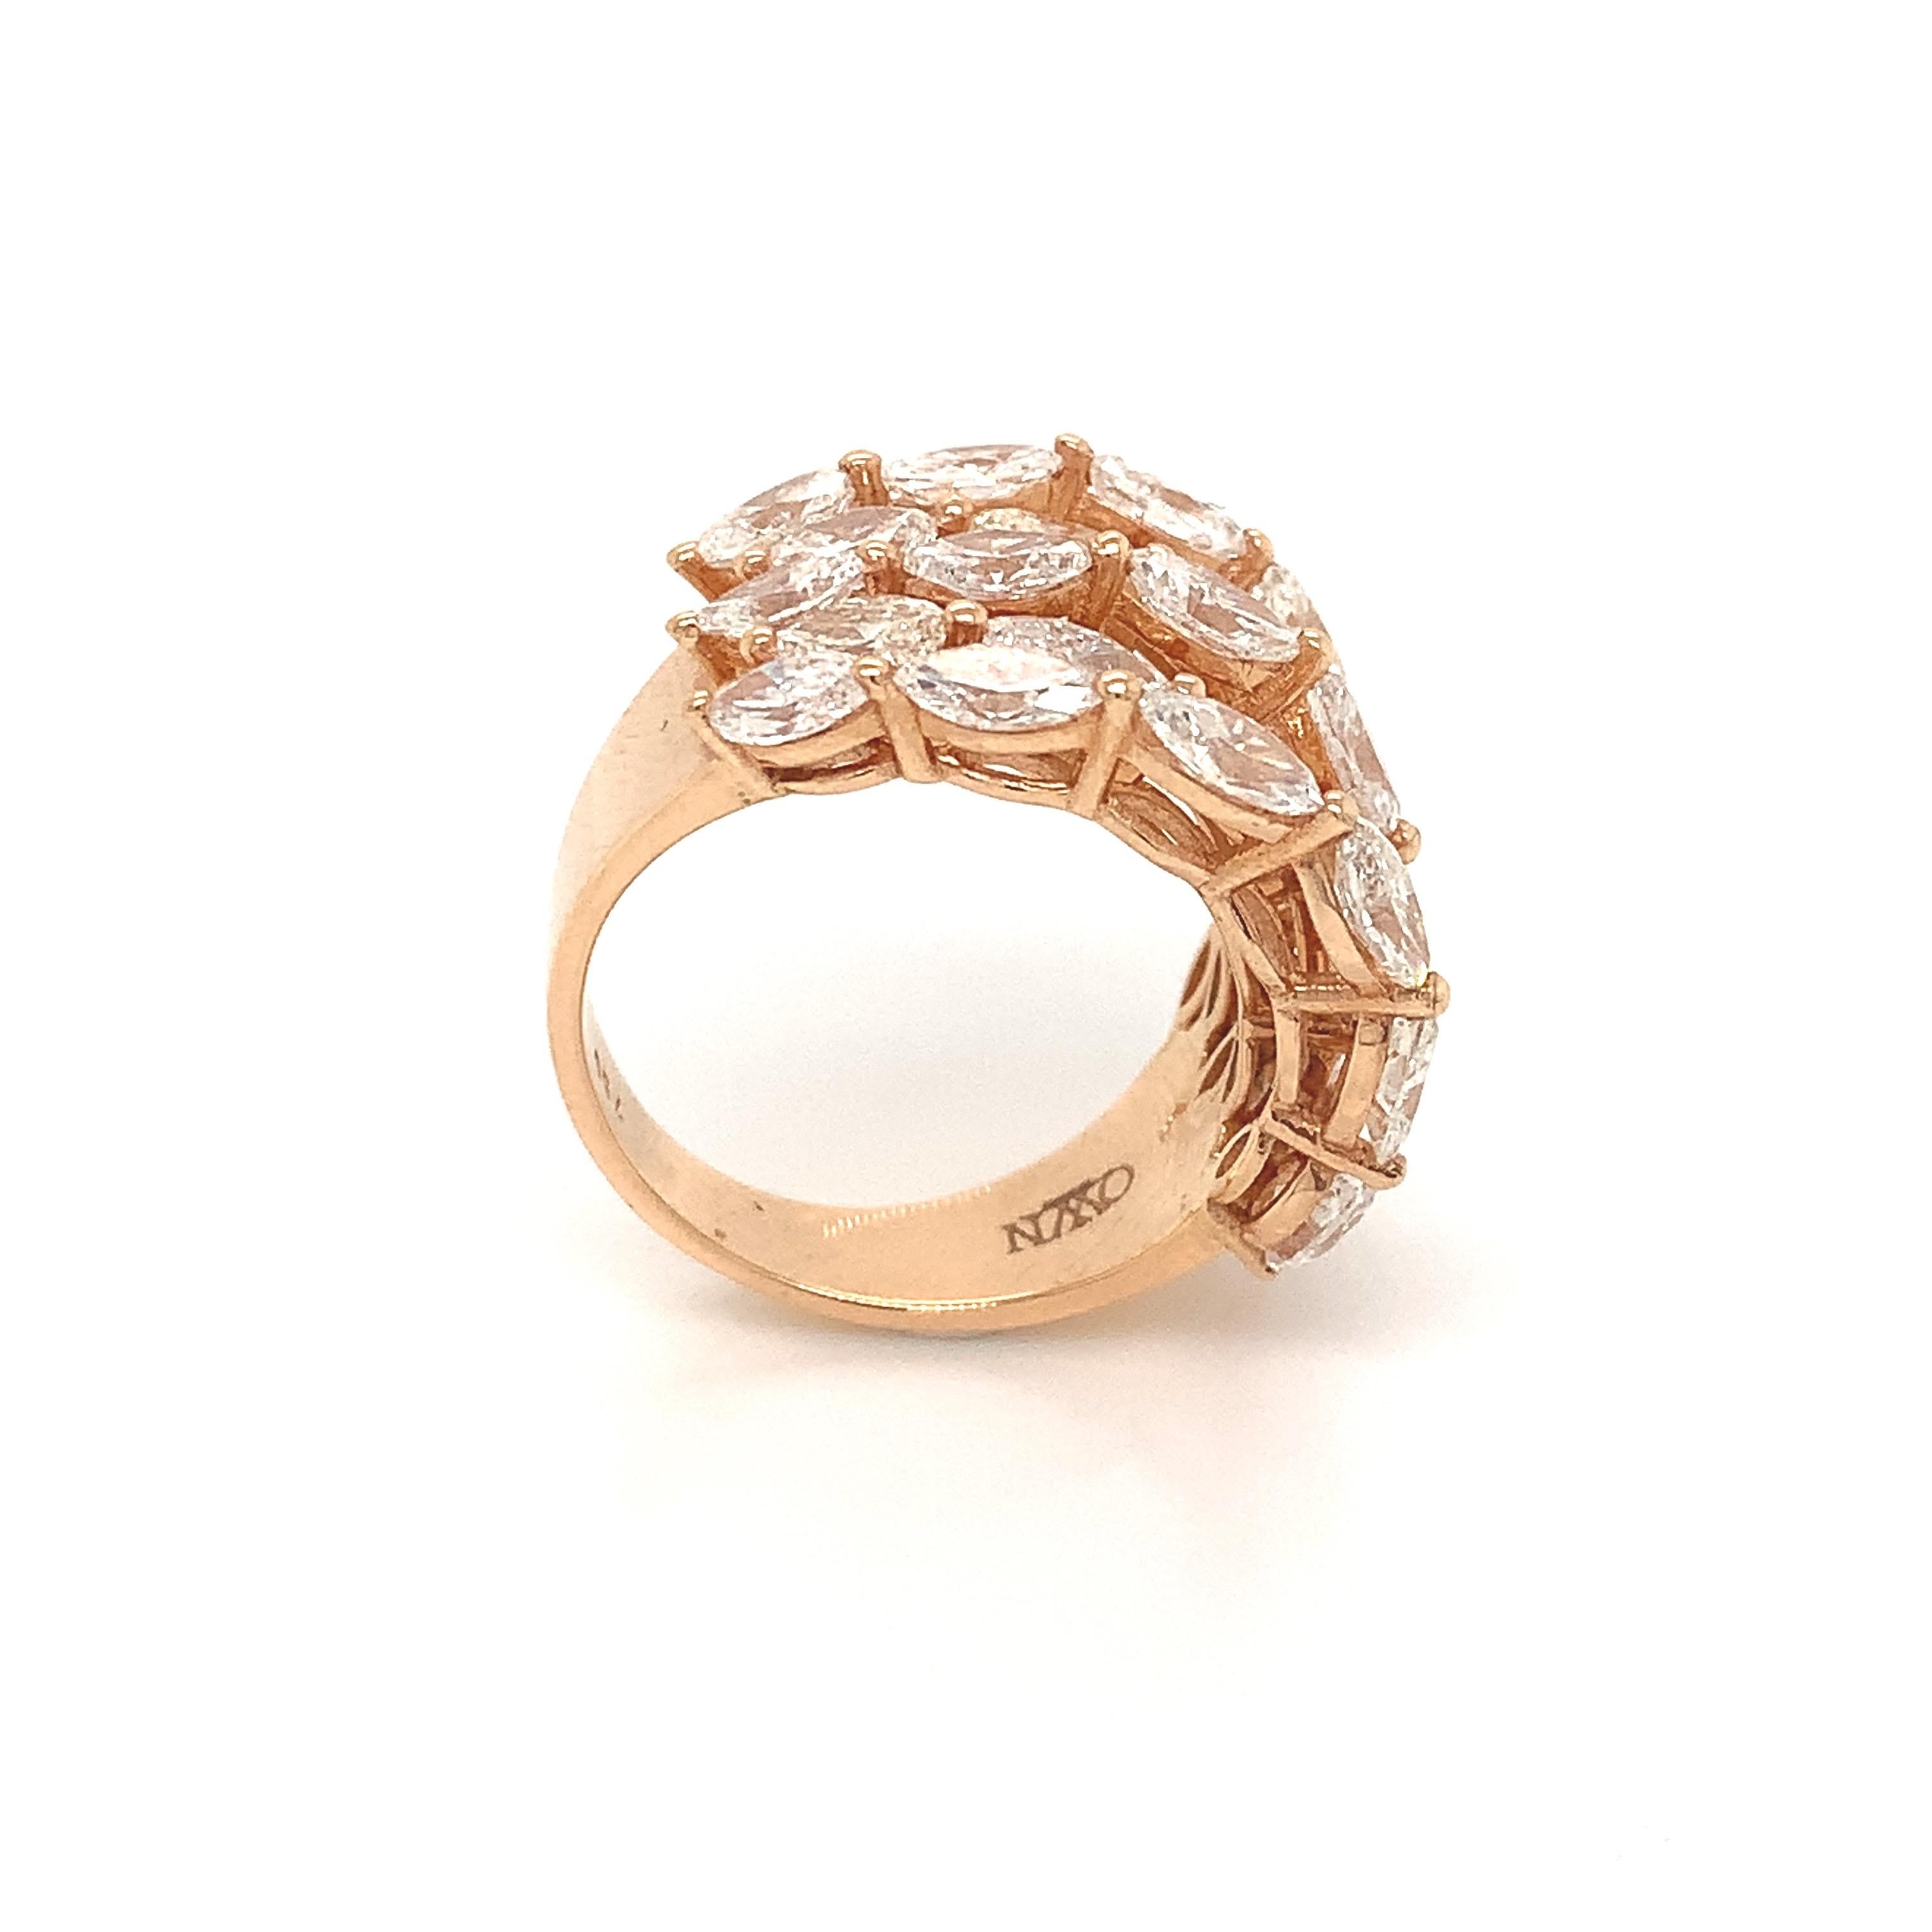 Breathtaking 5-row OWN Your Story 18K Rose Gold Marquise Diamond Linear Mosaic Ring. Treat yourself, give a gift and celebrate life's best moments with a beautiful hand crafted diamond cocktail ring. 

OWN Your Story brings its 3 generations of